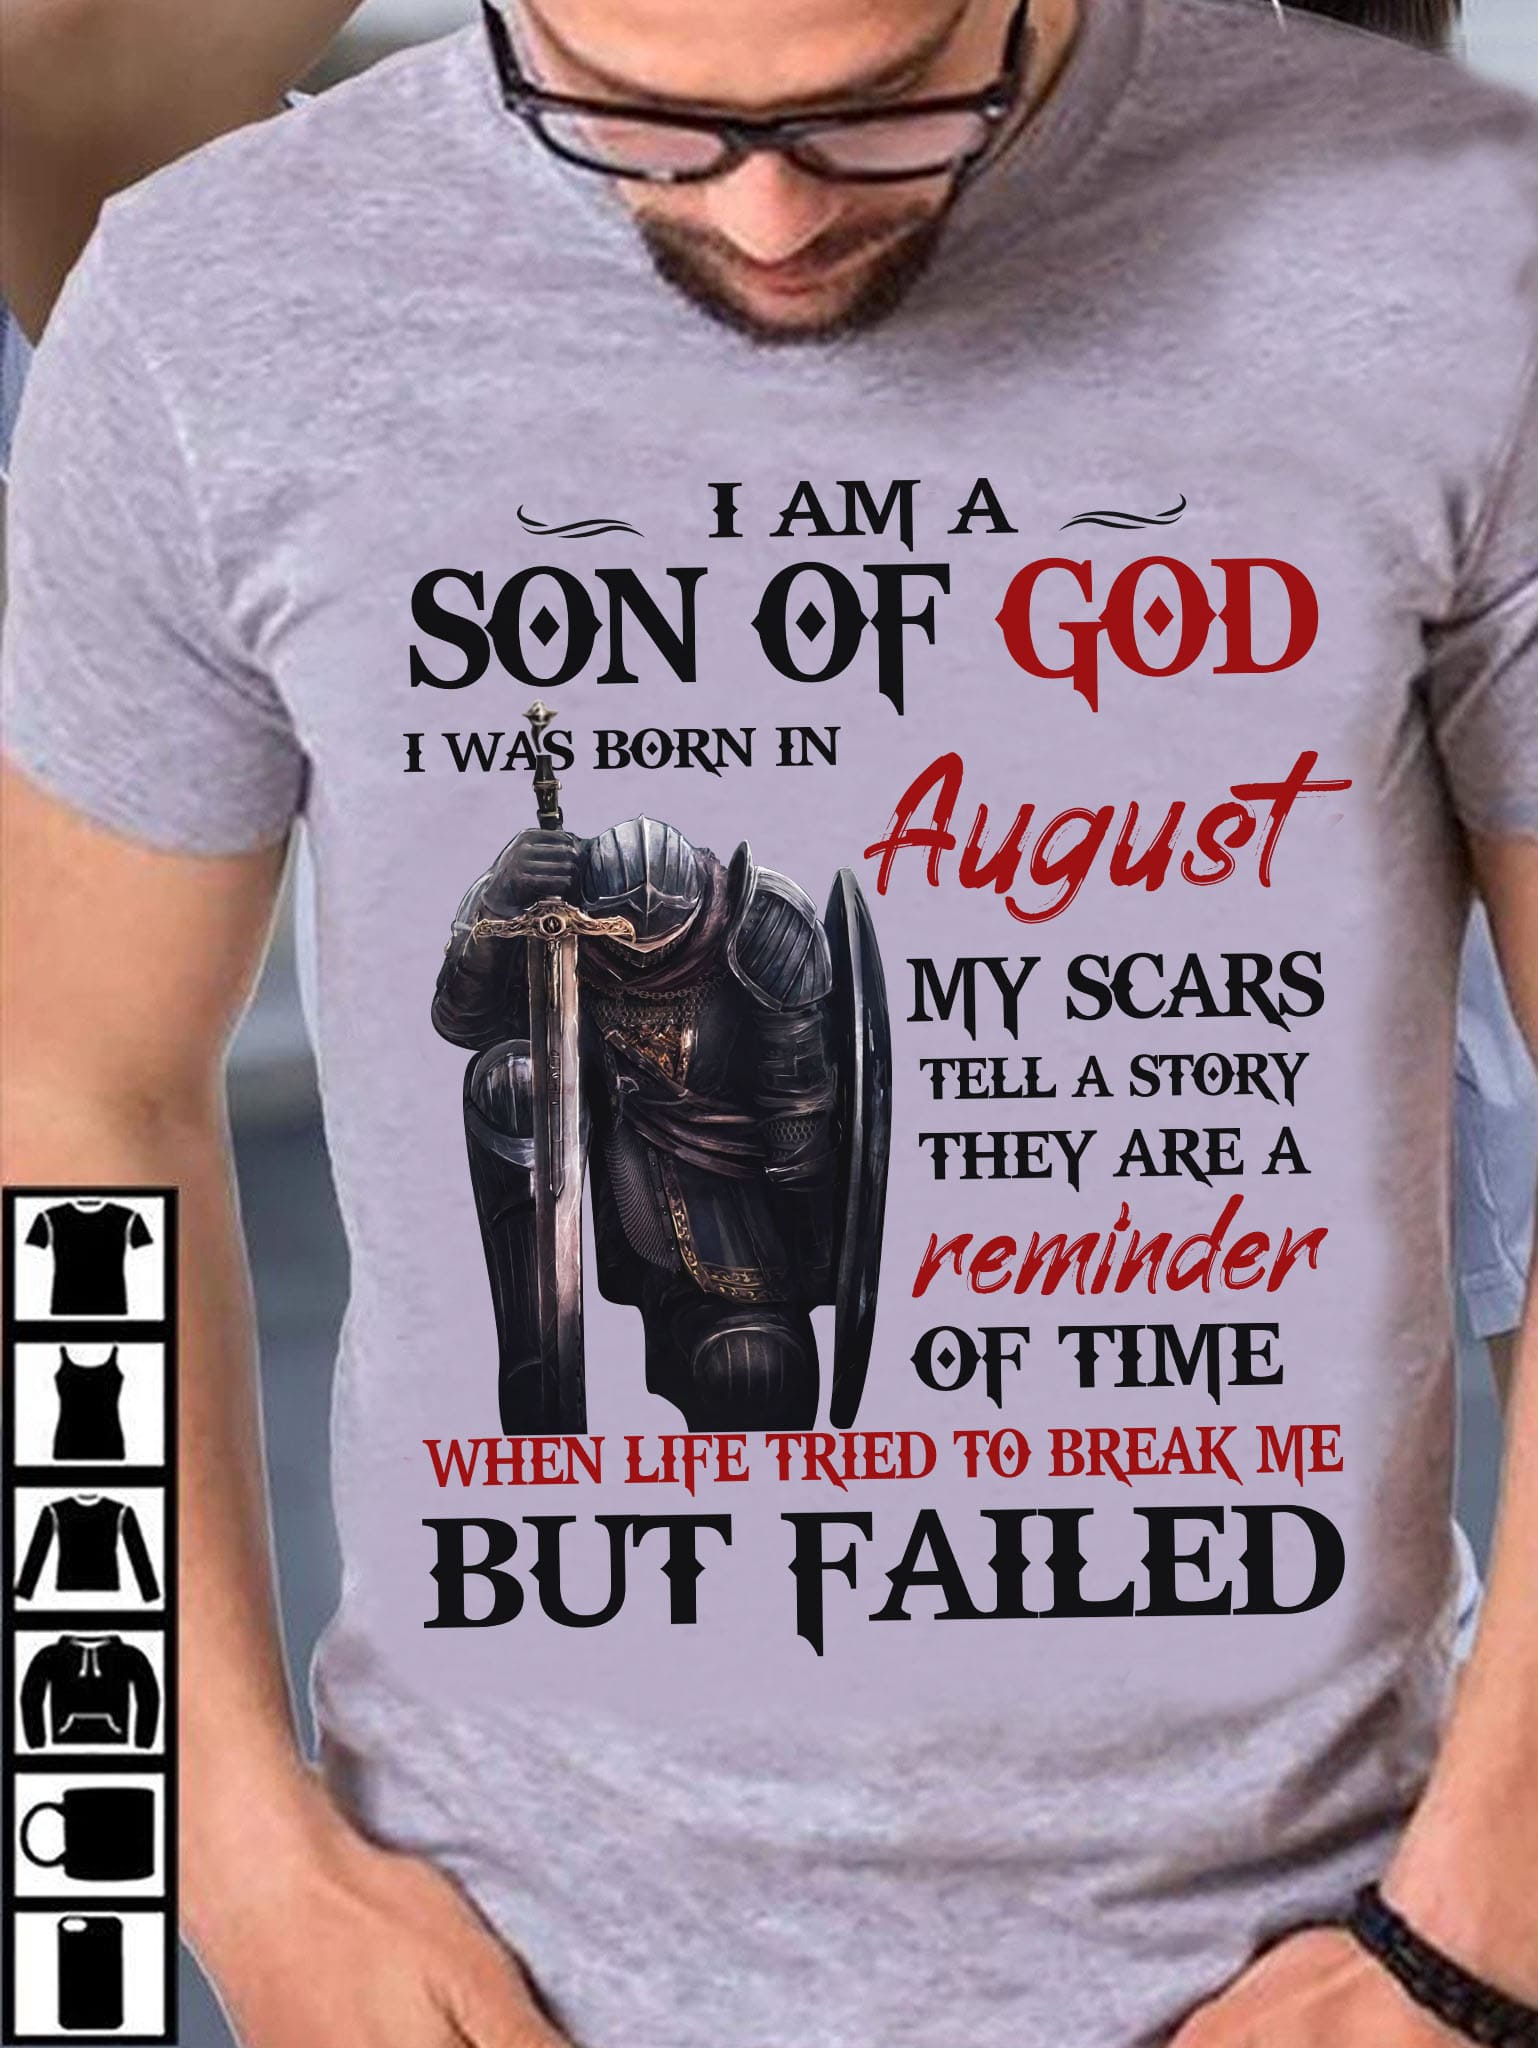 I am a Son of God I was born in August - August month of birth